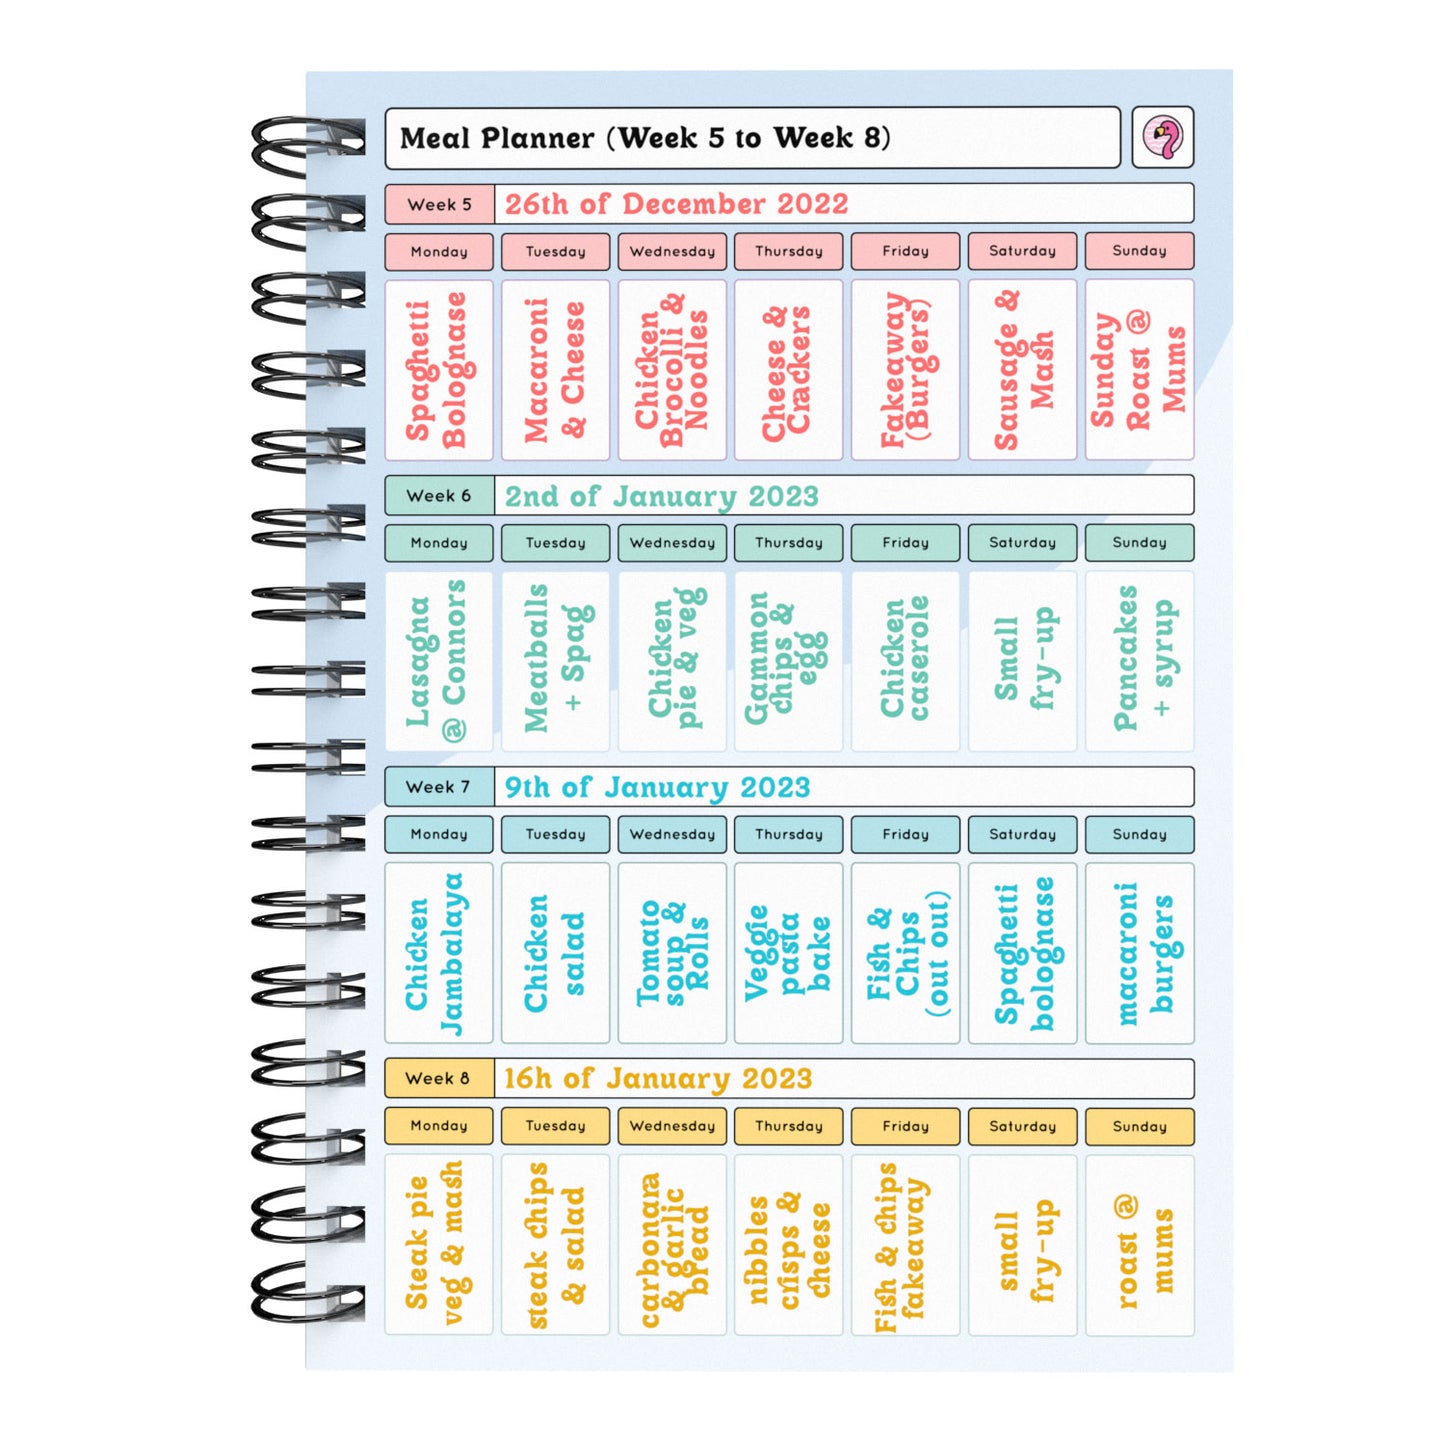 Food Diary - C31 - Calorie Counting